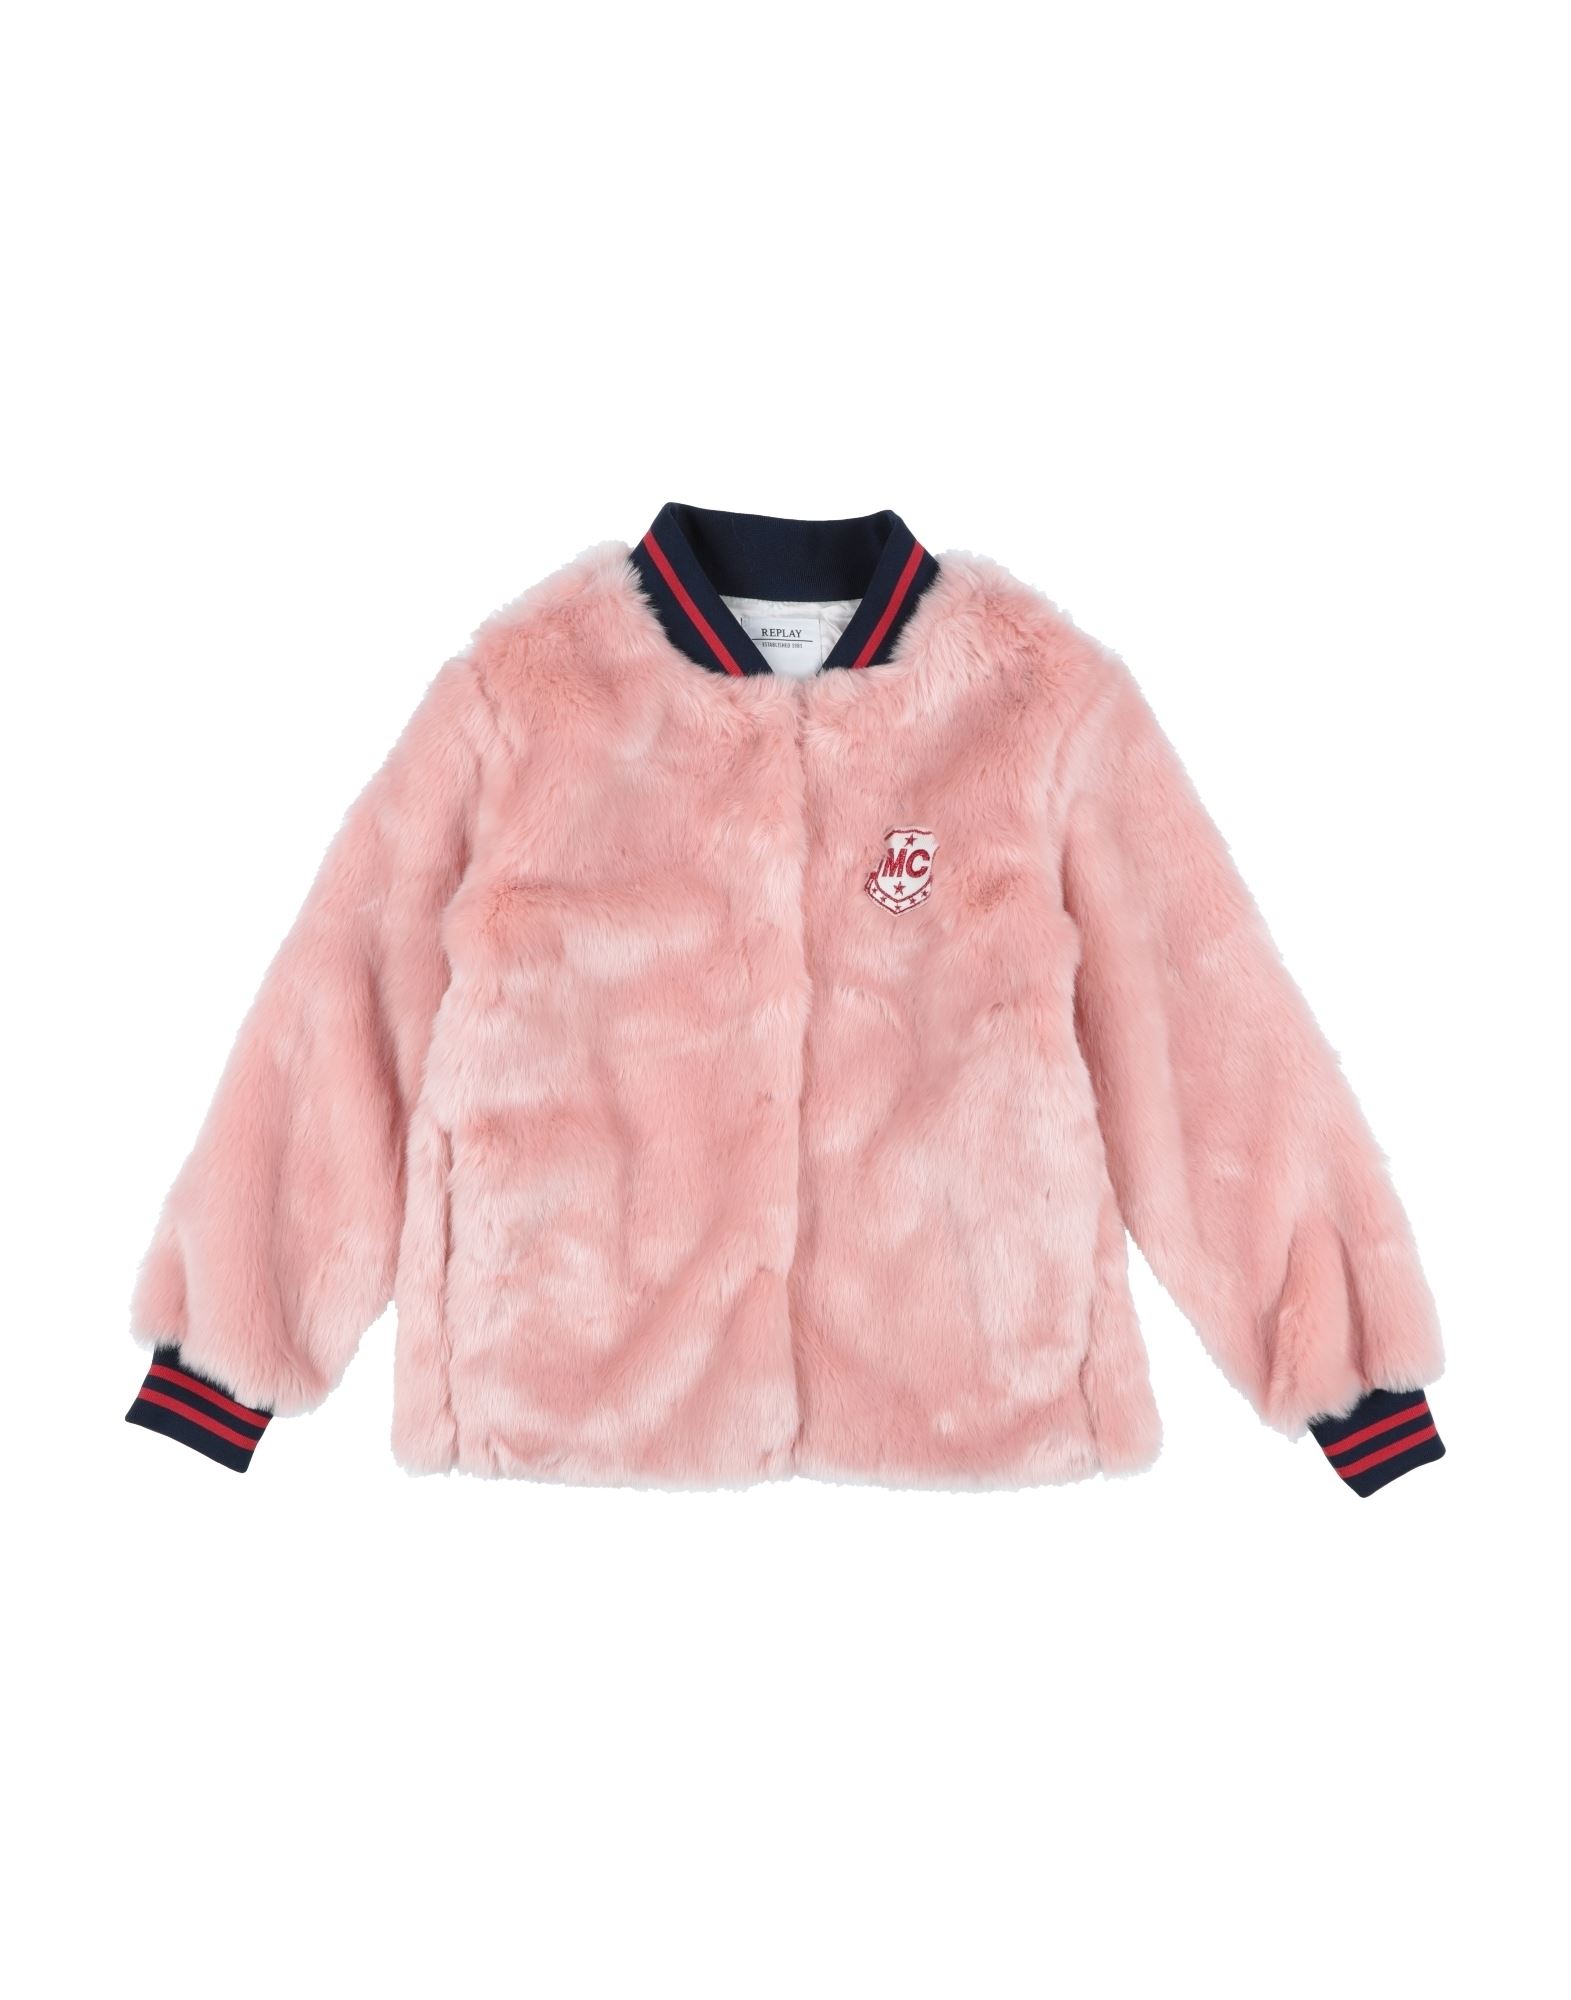 REPLAY & SONS Shearling- & Kunstfell Kinder Rosa von REPLAY & SONS